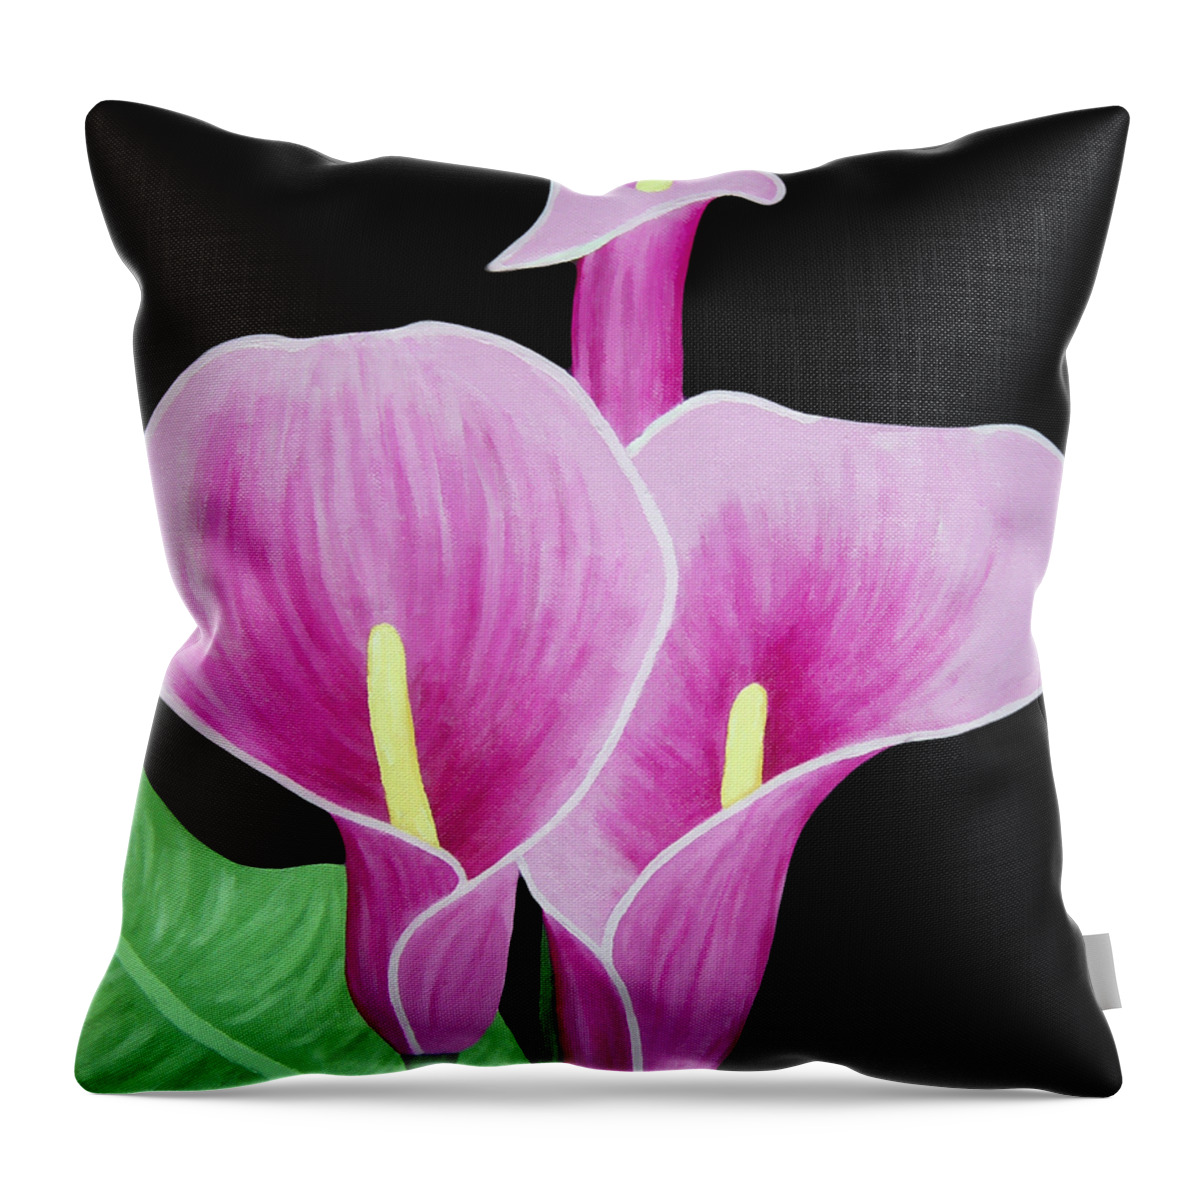 Flowers Throw Pillow featuring the painting Pink Calla Lilies 1 by Angelina Tamez